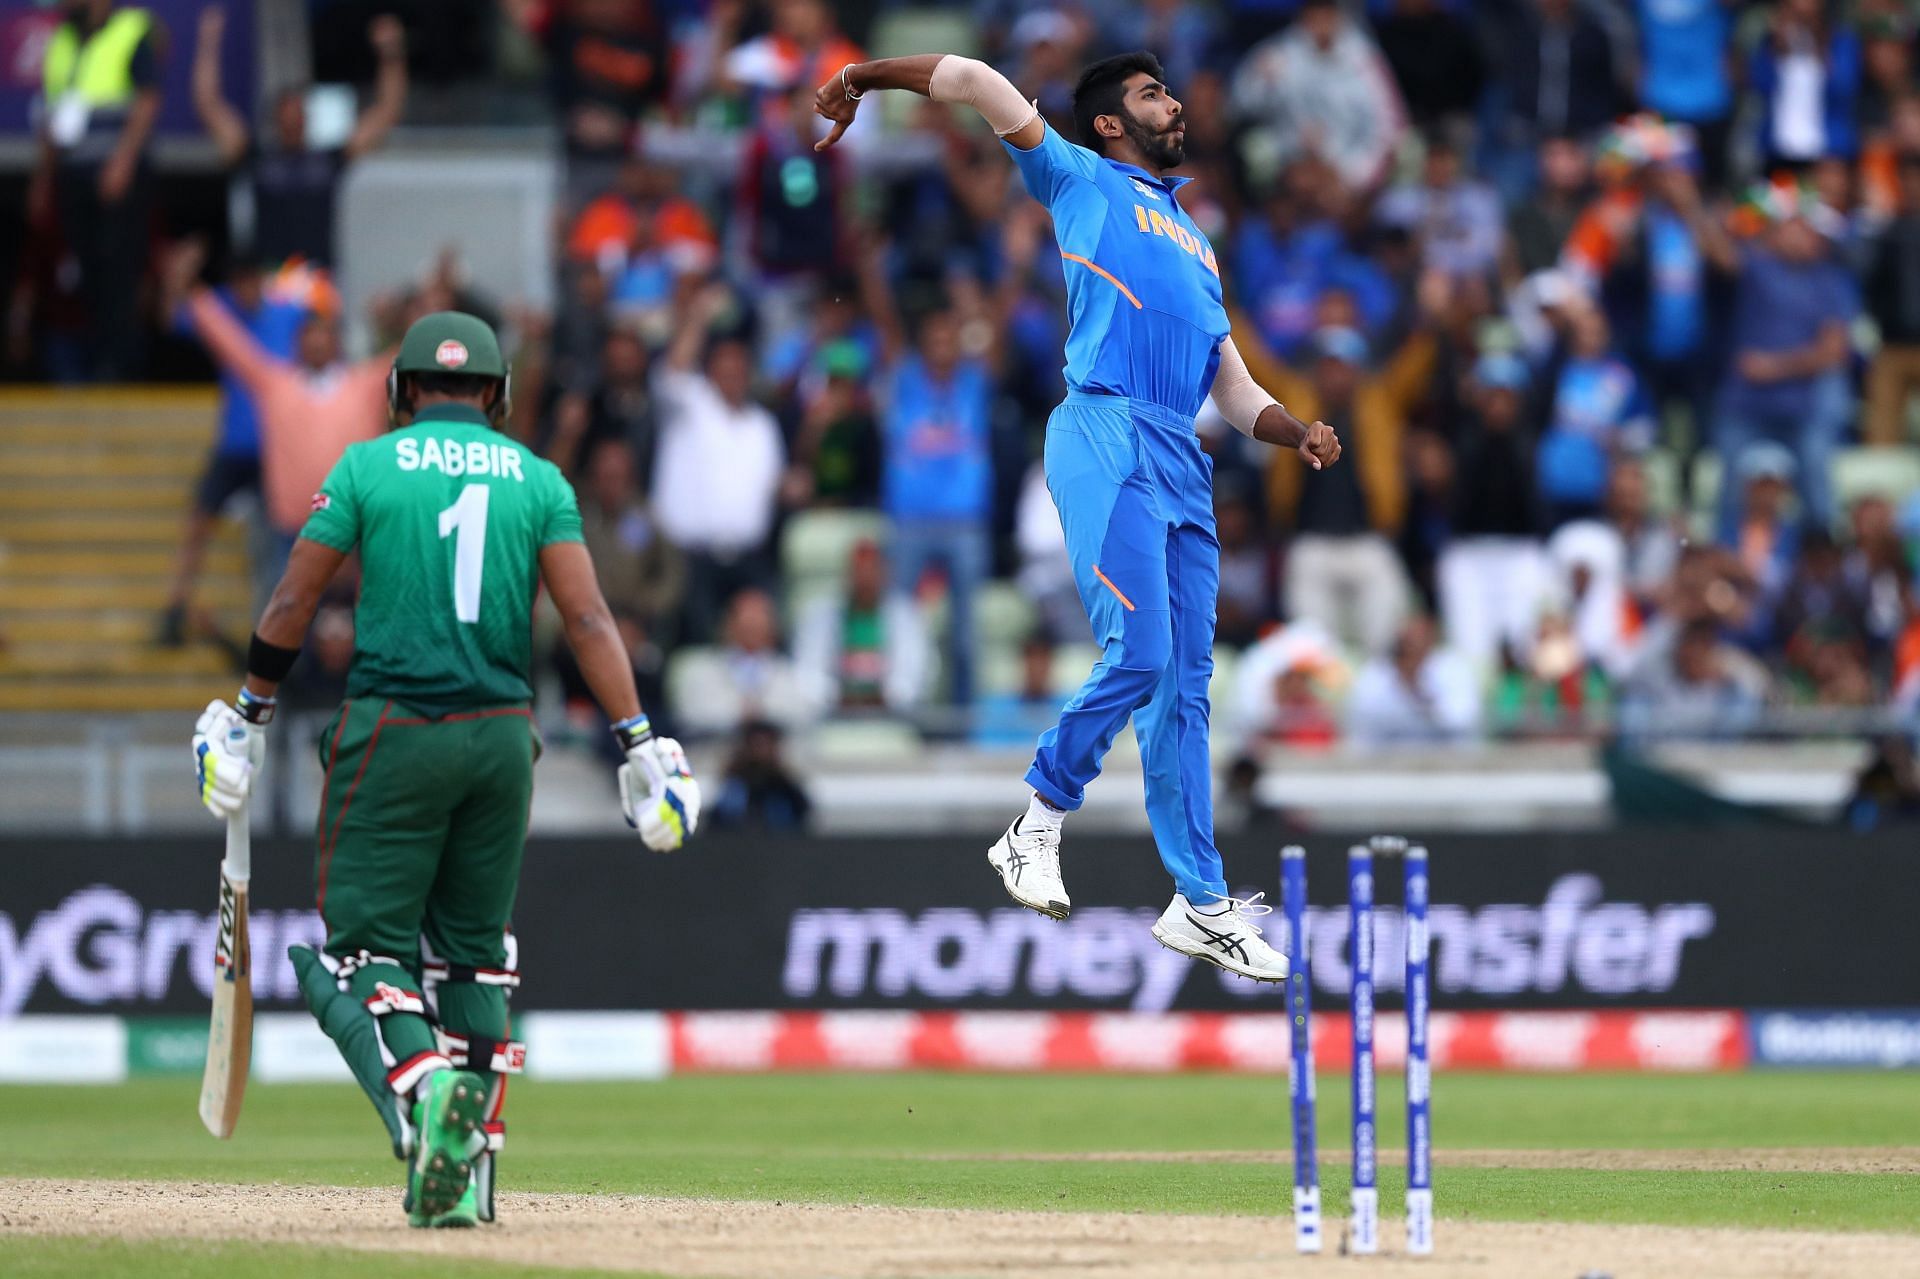 Jasprit Bumrah (R) disturbing the furniture at will makes him a sure-shot pick for any team regardless of the format!